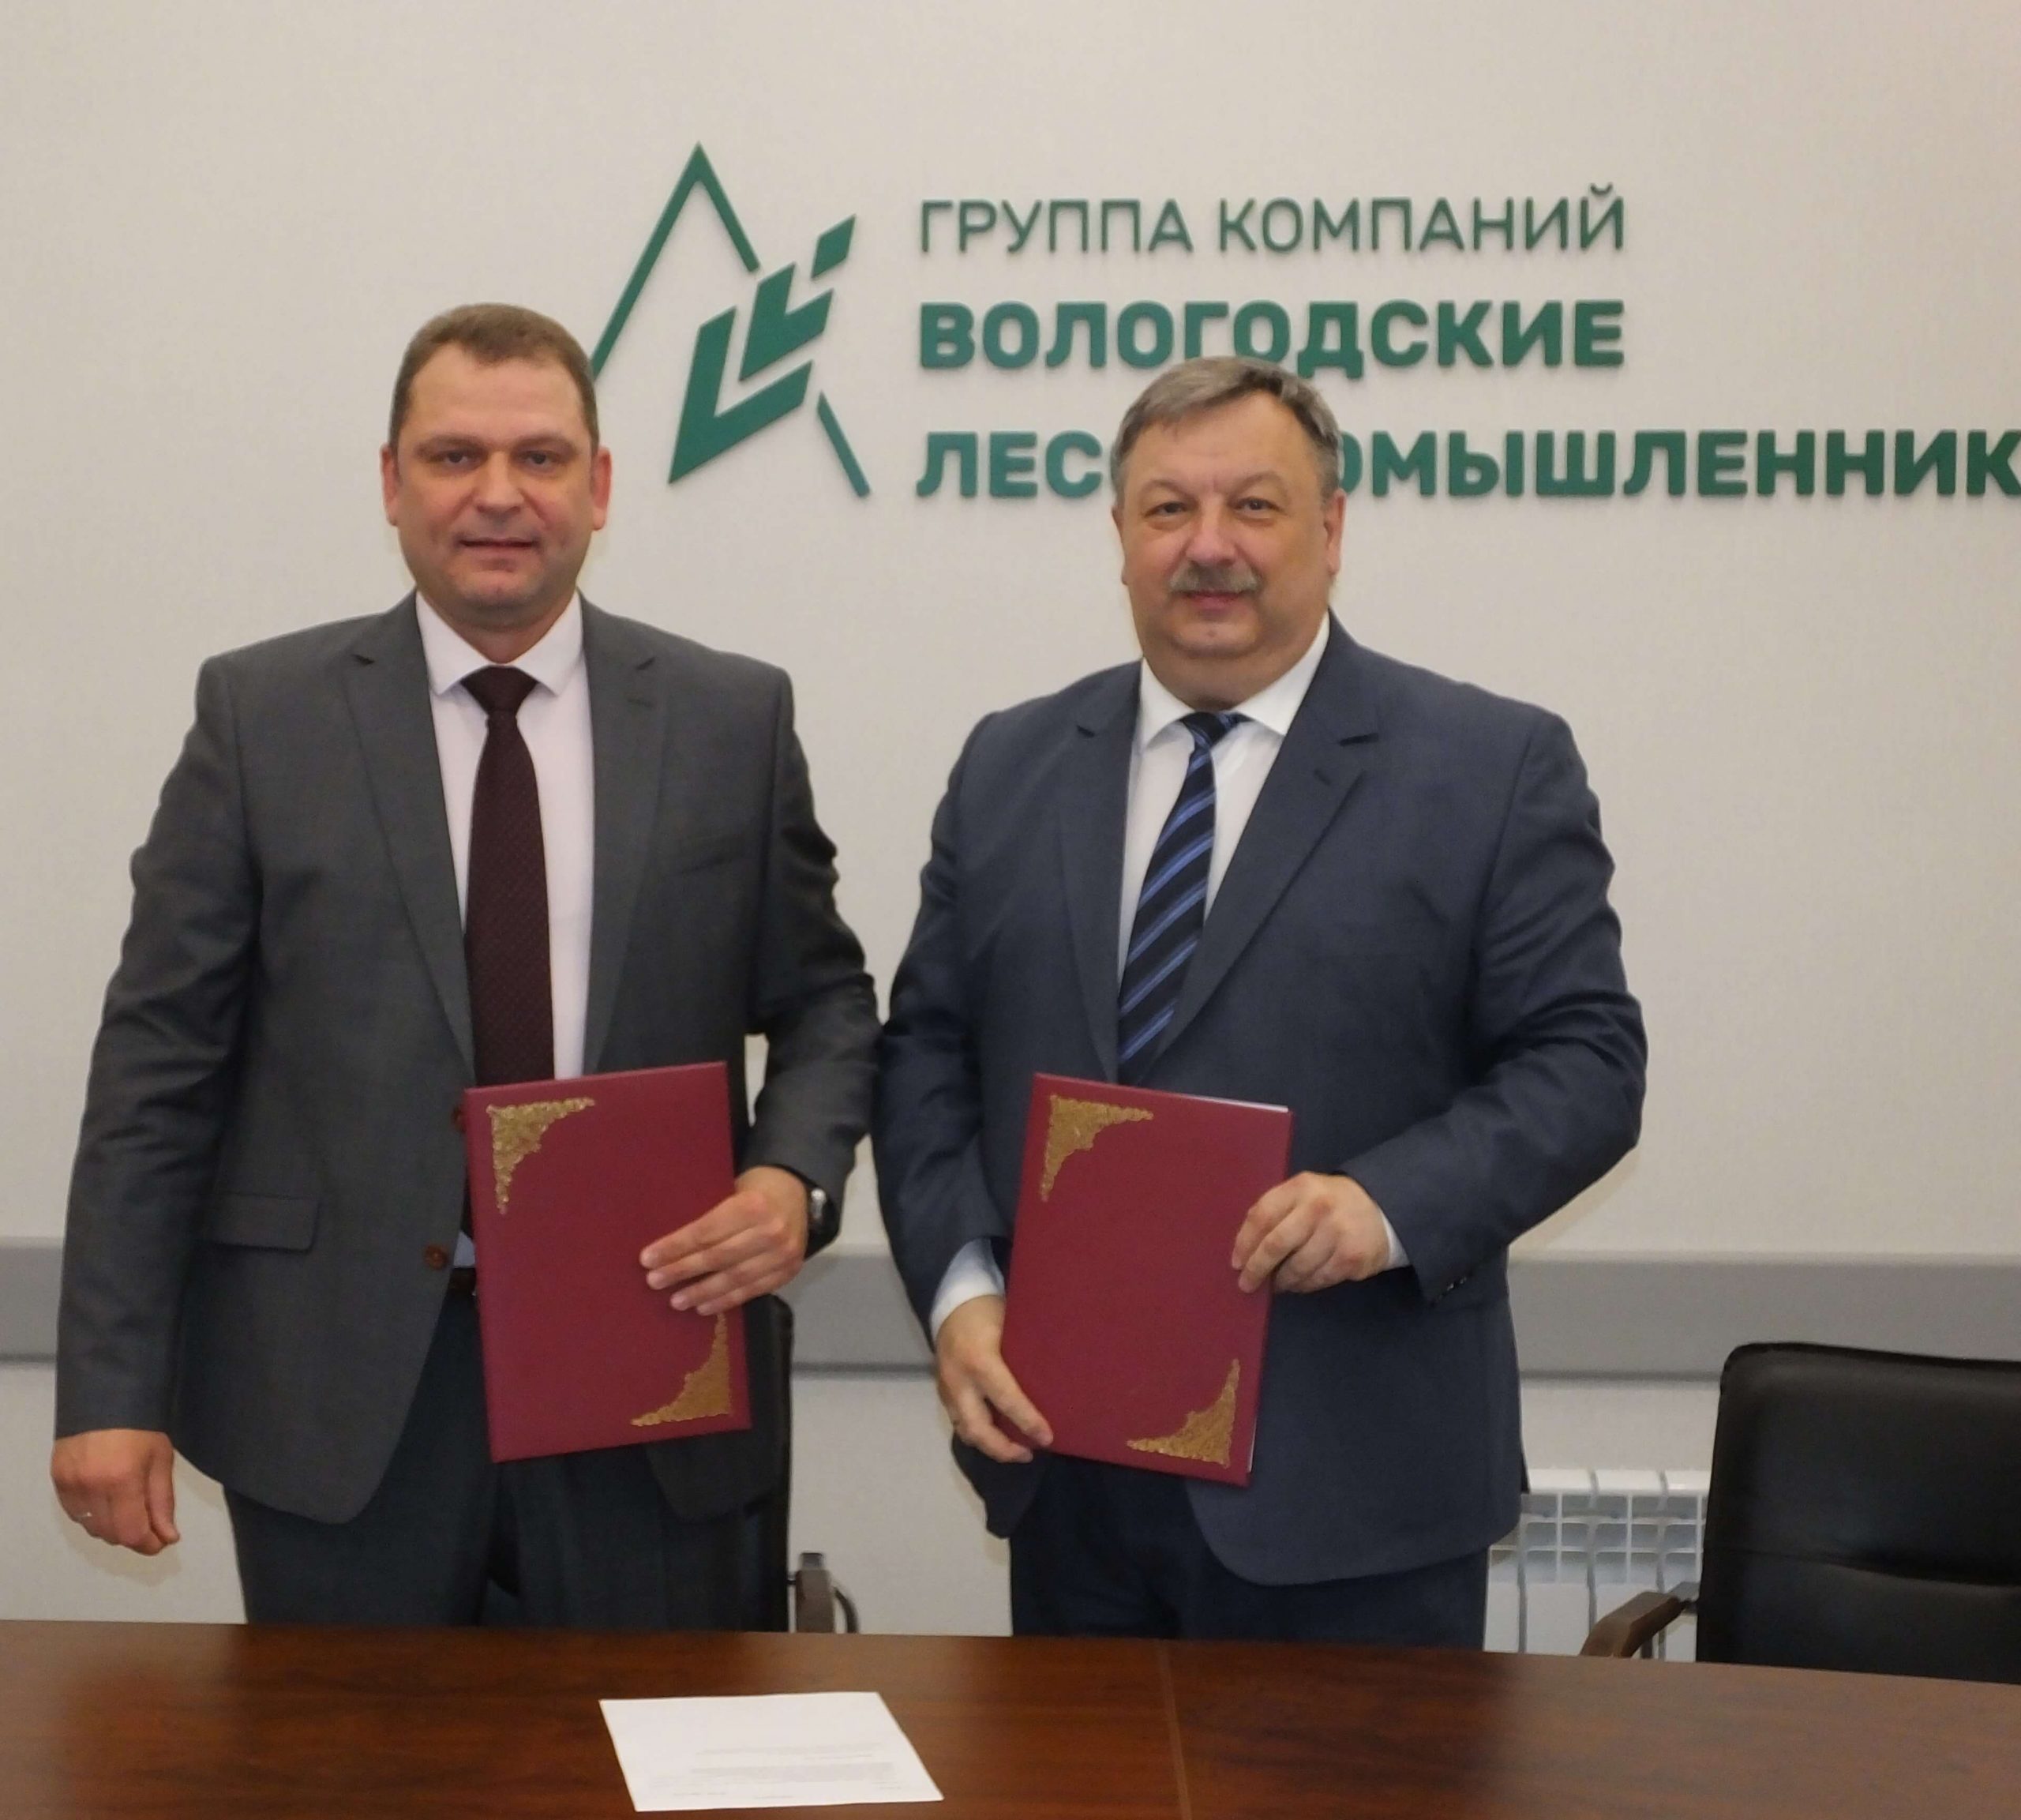 Cooperation agreement signed with Vologda State University